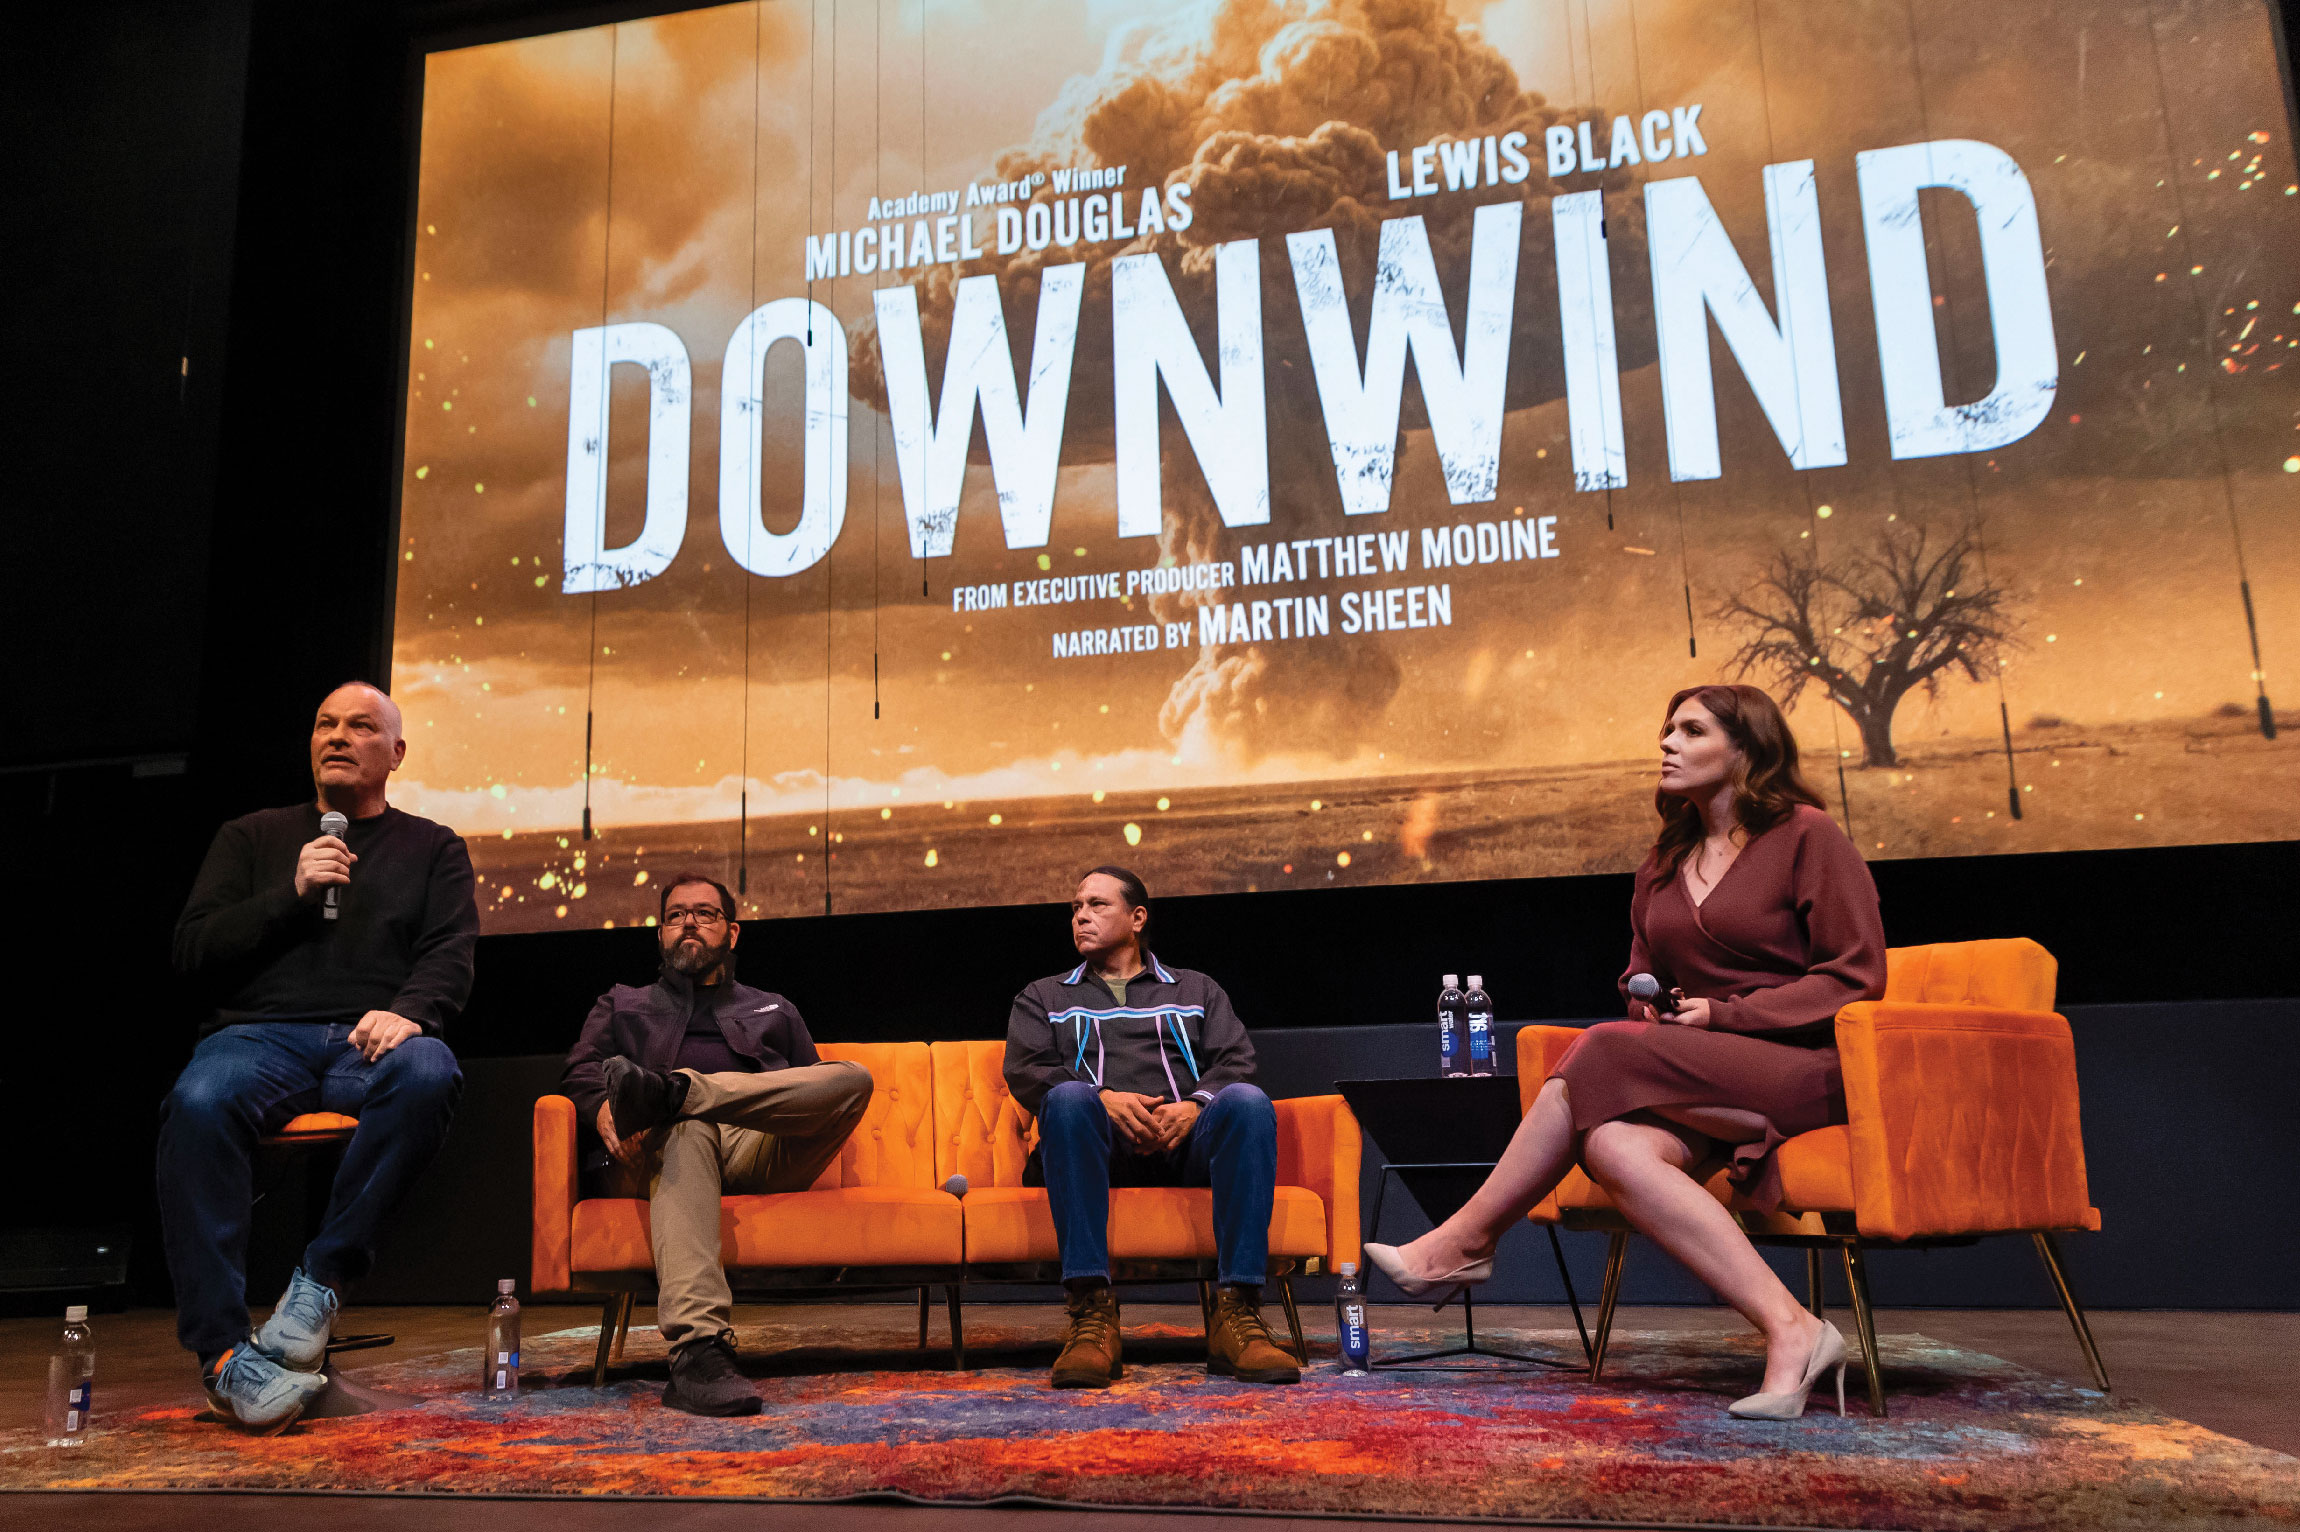 New documentary ‘Downwind’ urges awareness about Nevada nuclear testing